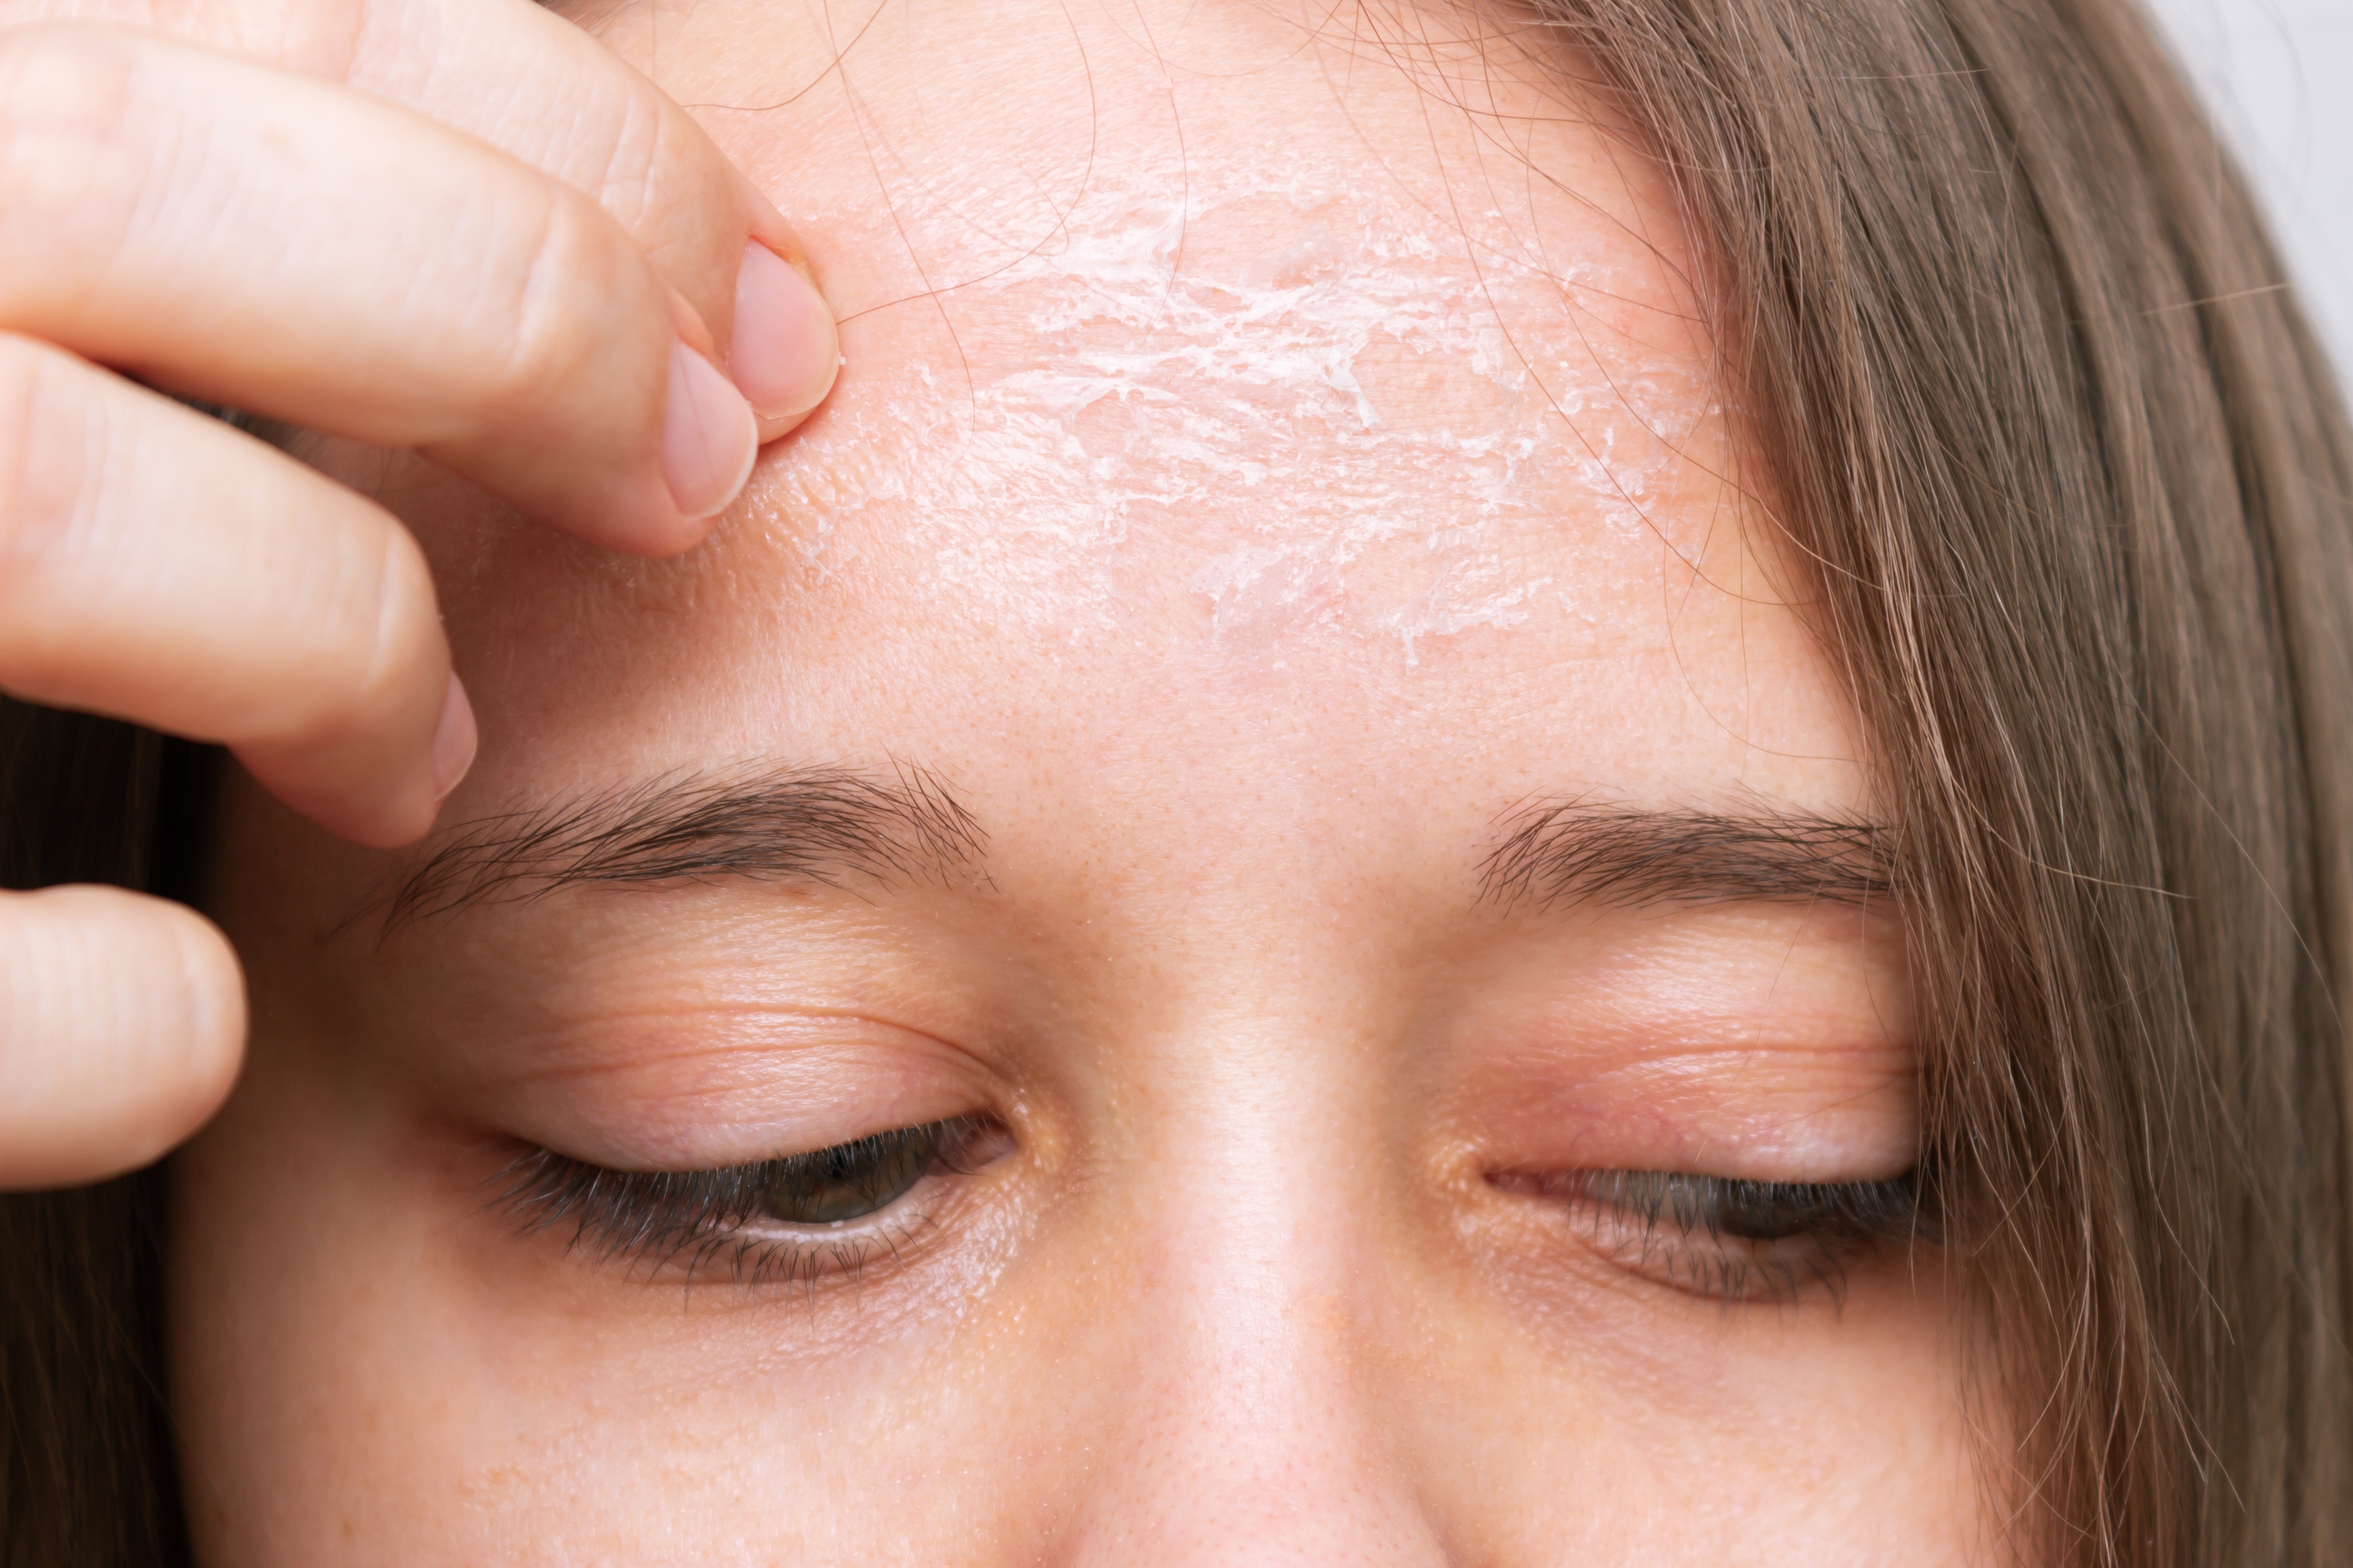 A close-up of a woman's forehead with dry skin | Source: Shutterstock